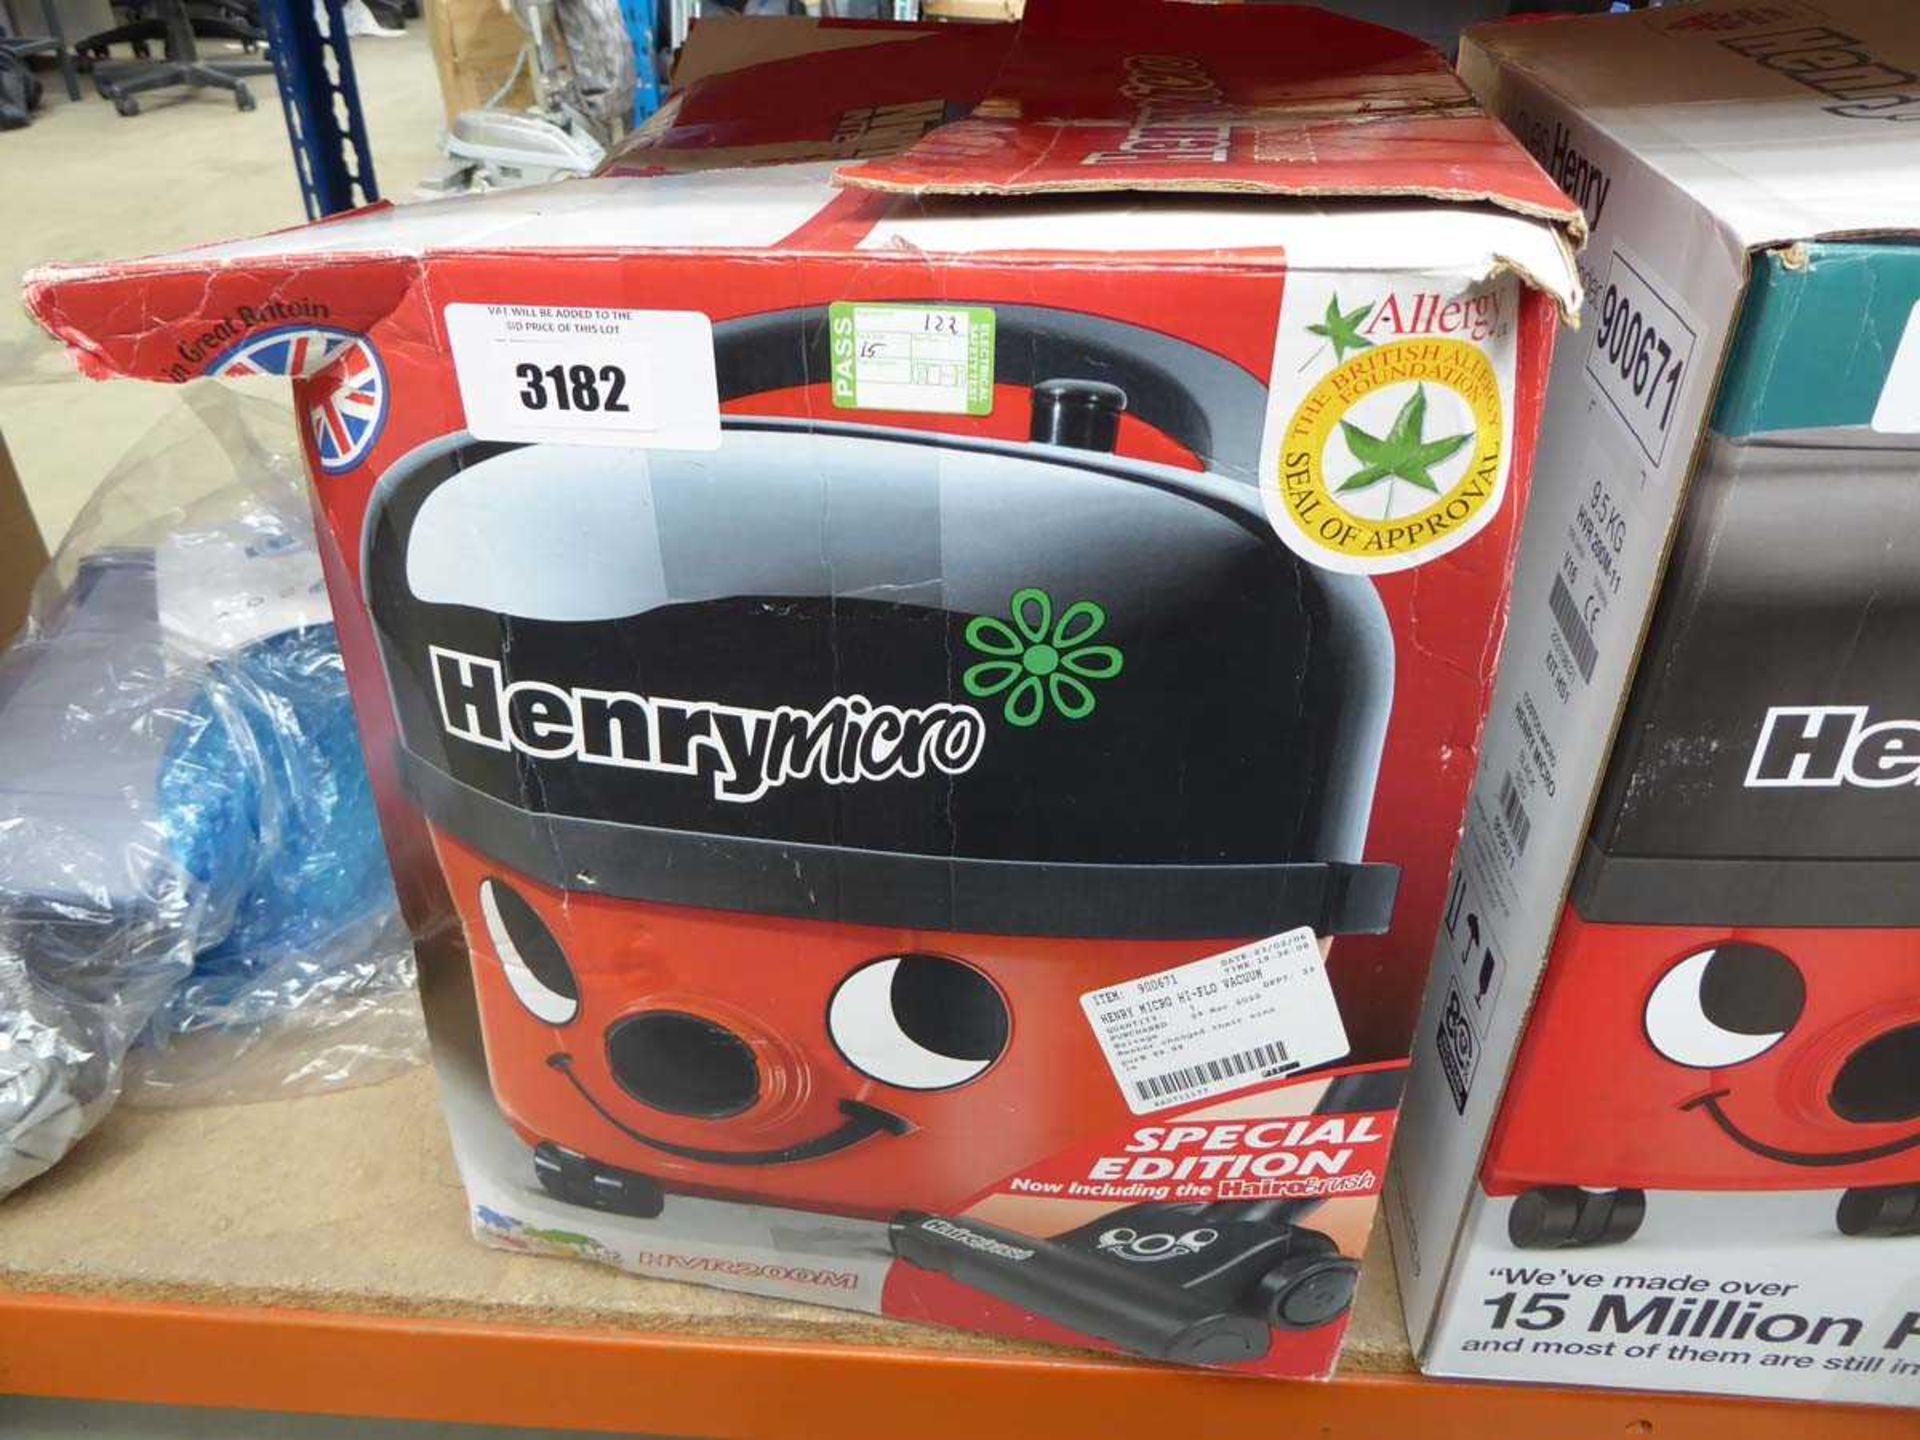 +VAT Henry micro vacuum cleaner with a pole and box